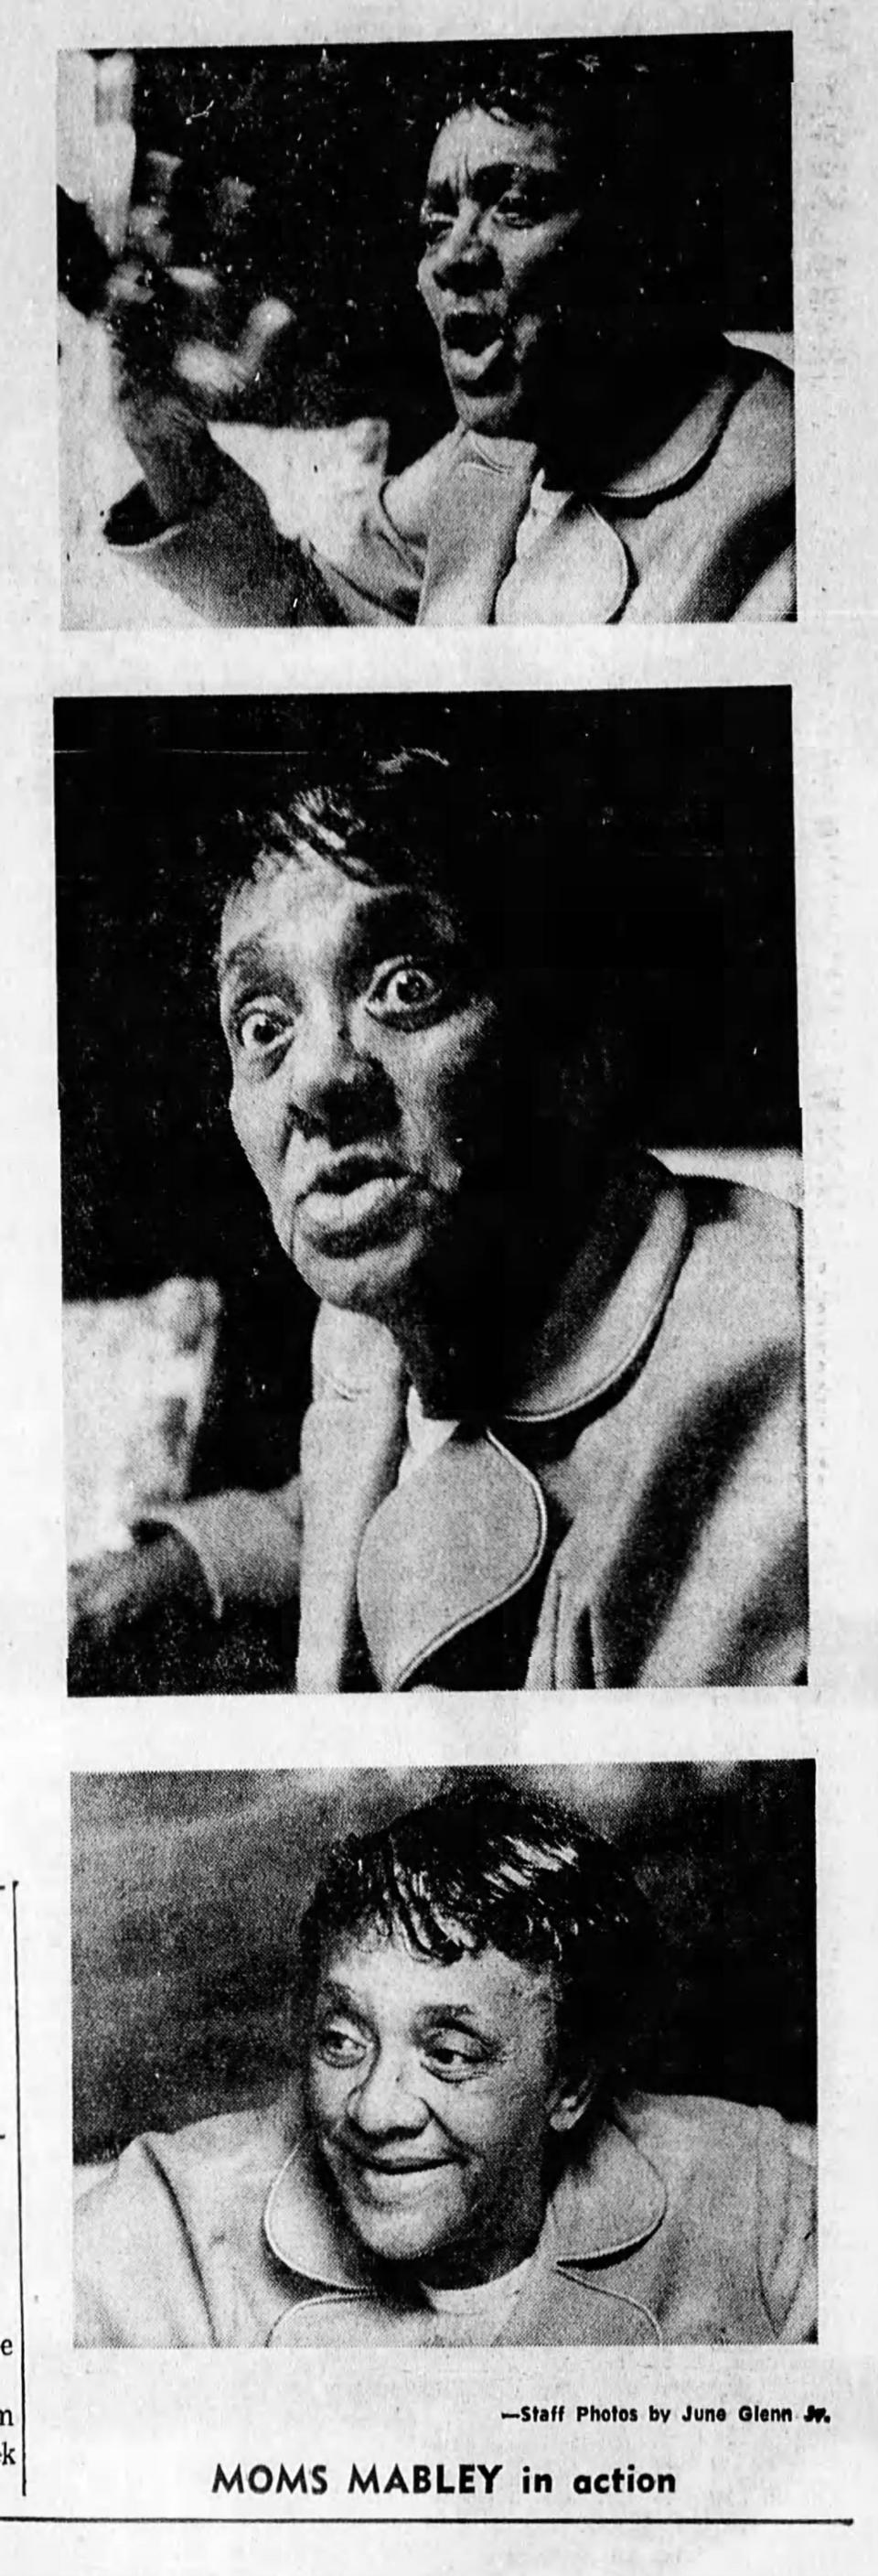 Photos of Moms Mabley appeared in the Oct. 22, 1971, edition of the Asheville Citizen Times.